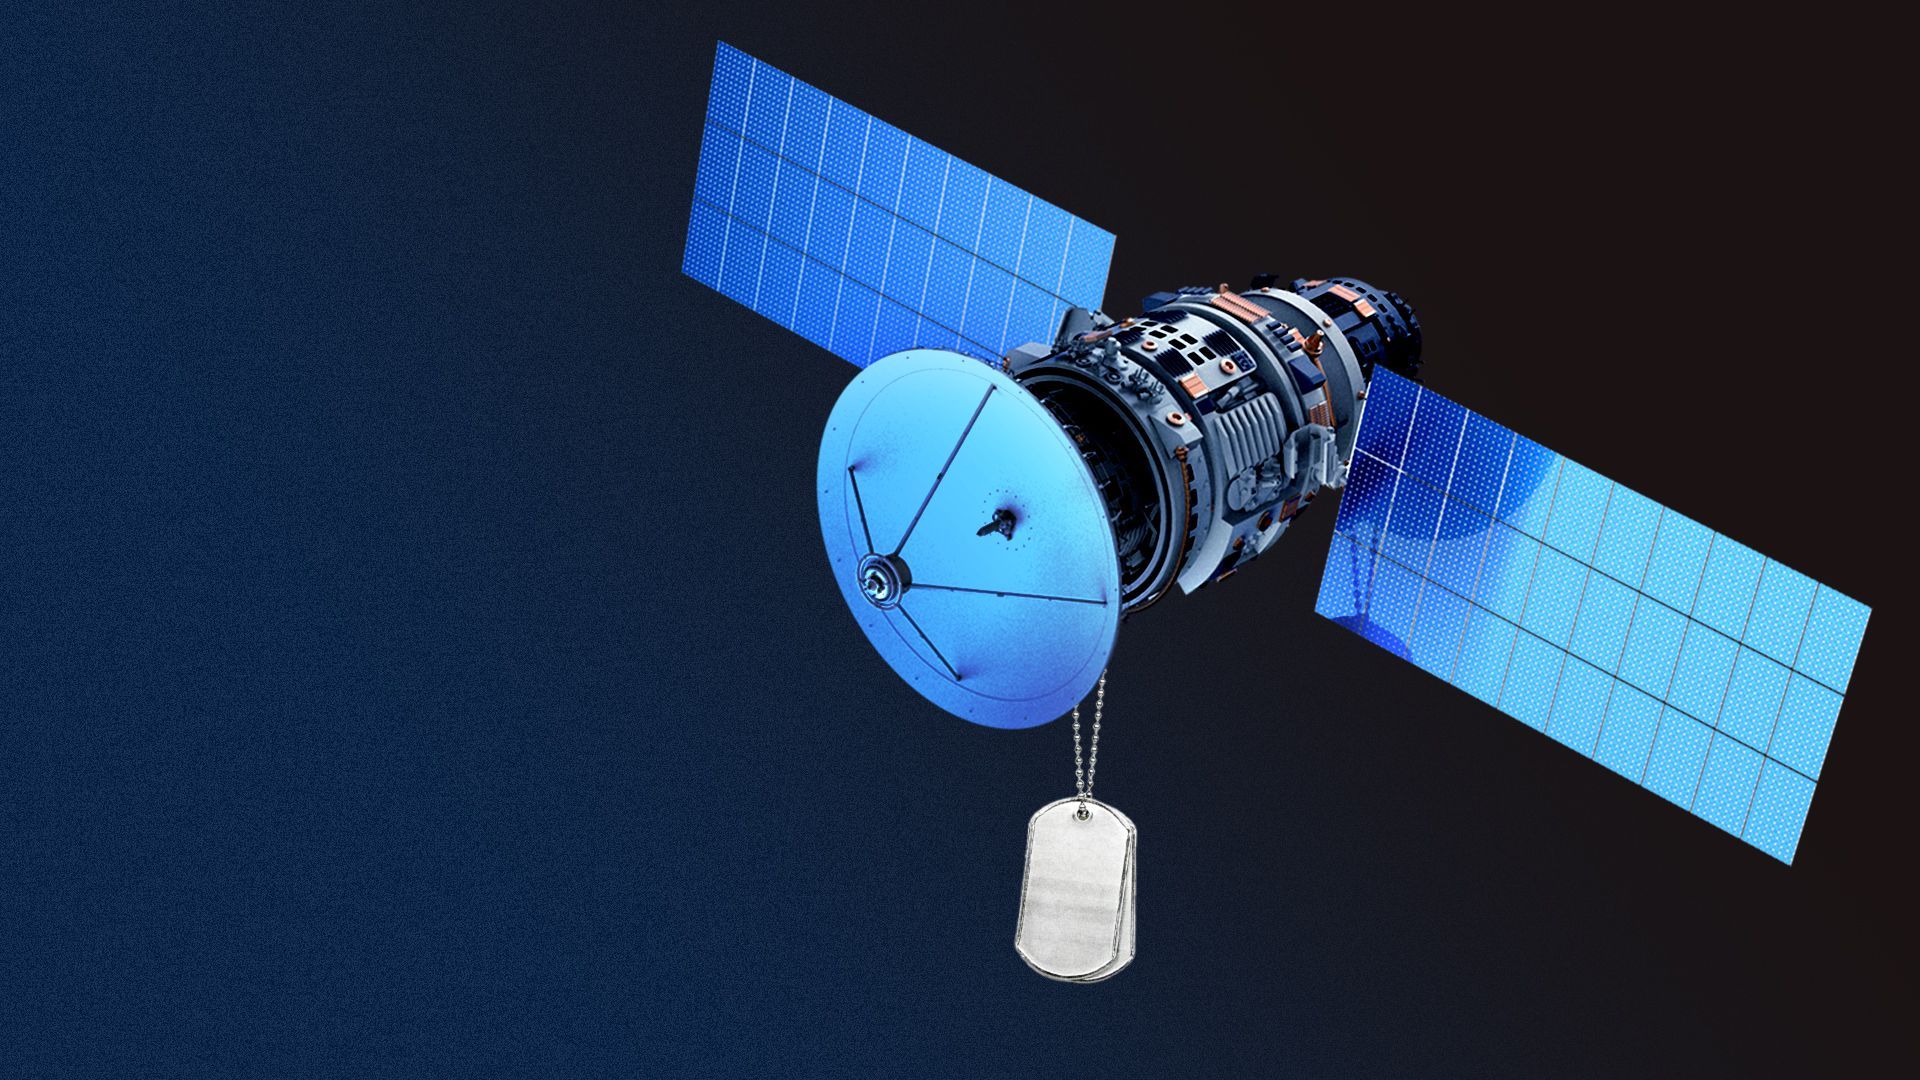 Illustration of a satellite with dog tags hanging from it